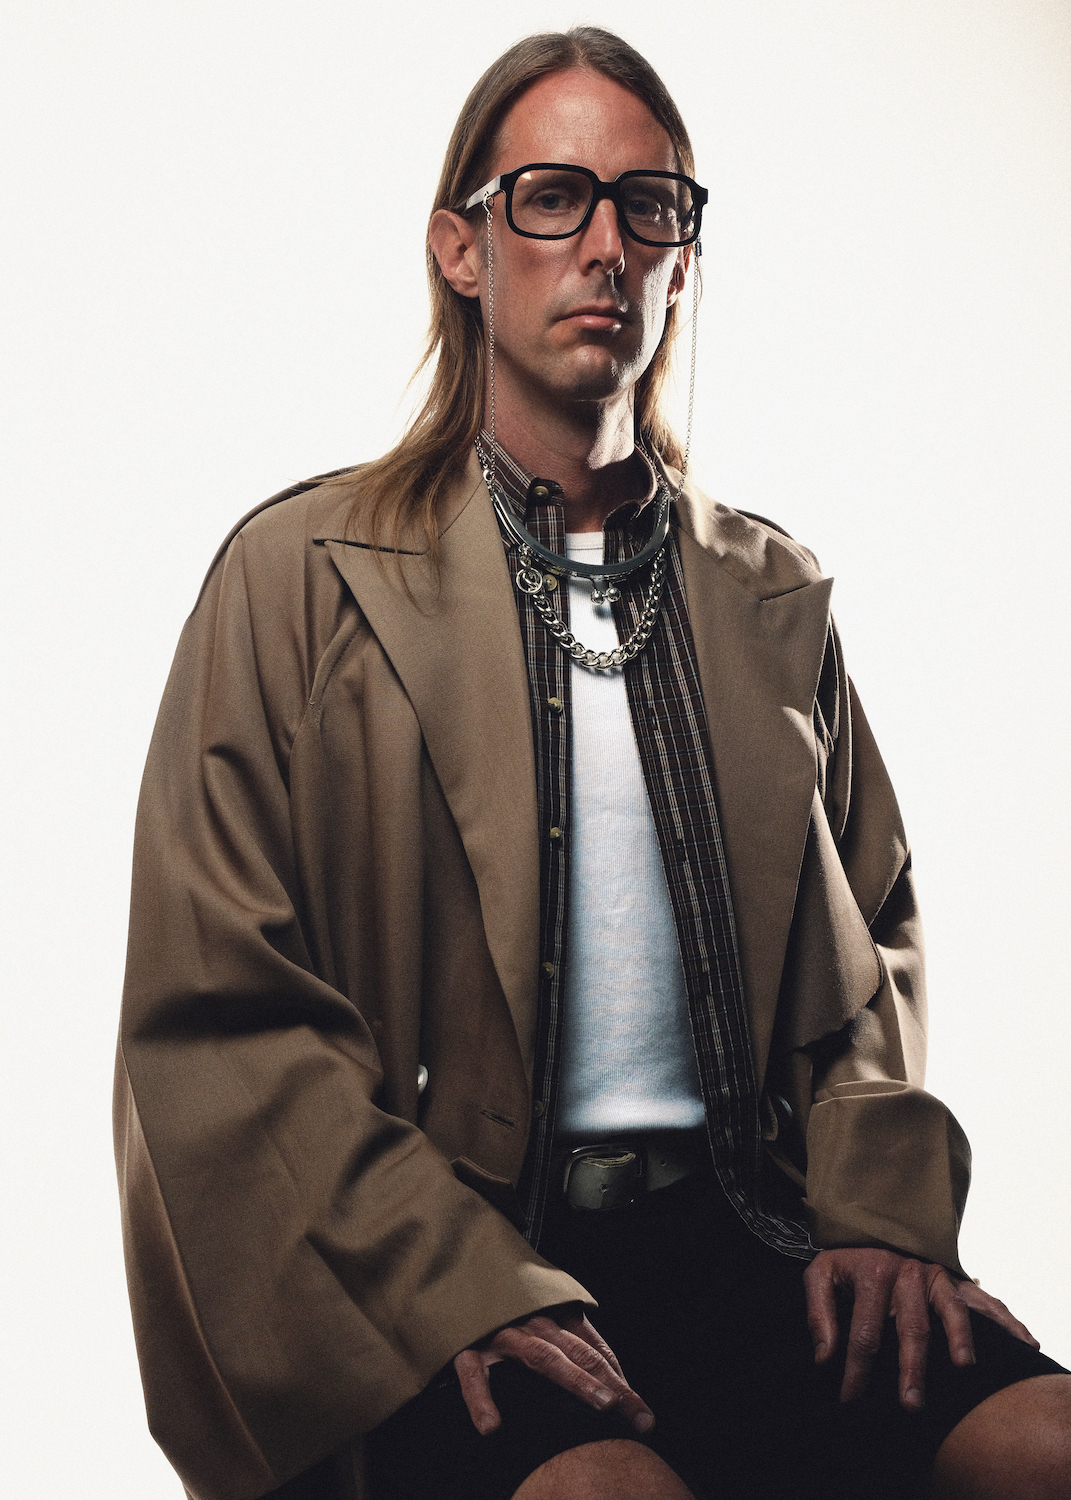 Alex wears glasses and accessories by Huma Eyewear, trench by Setchu, shirt and belt stylist’s own, tank top by Grifoni and trousers by JordanLuca.